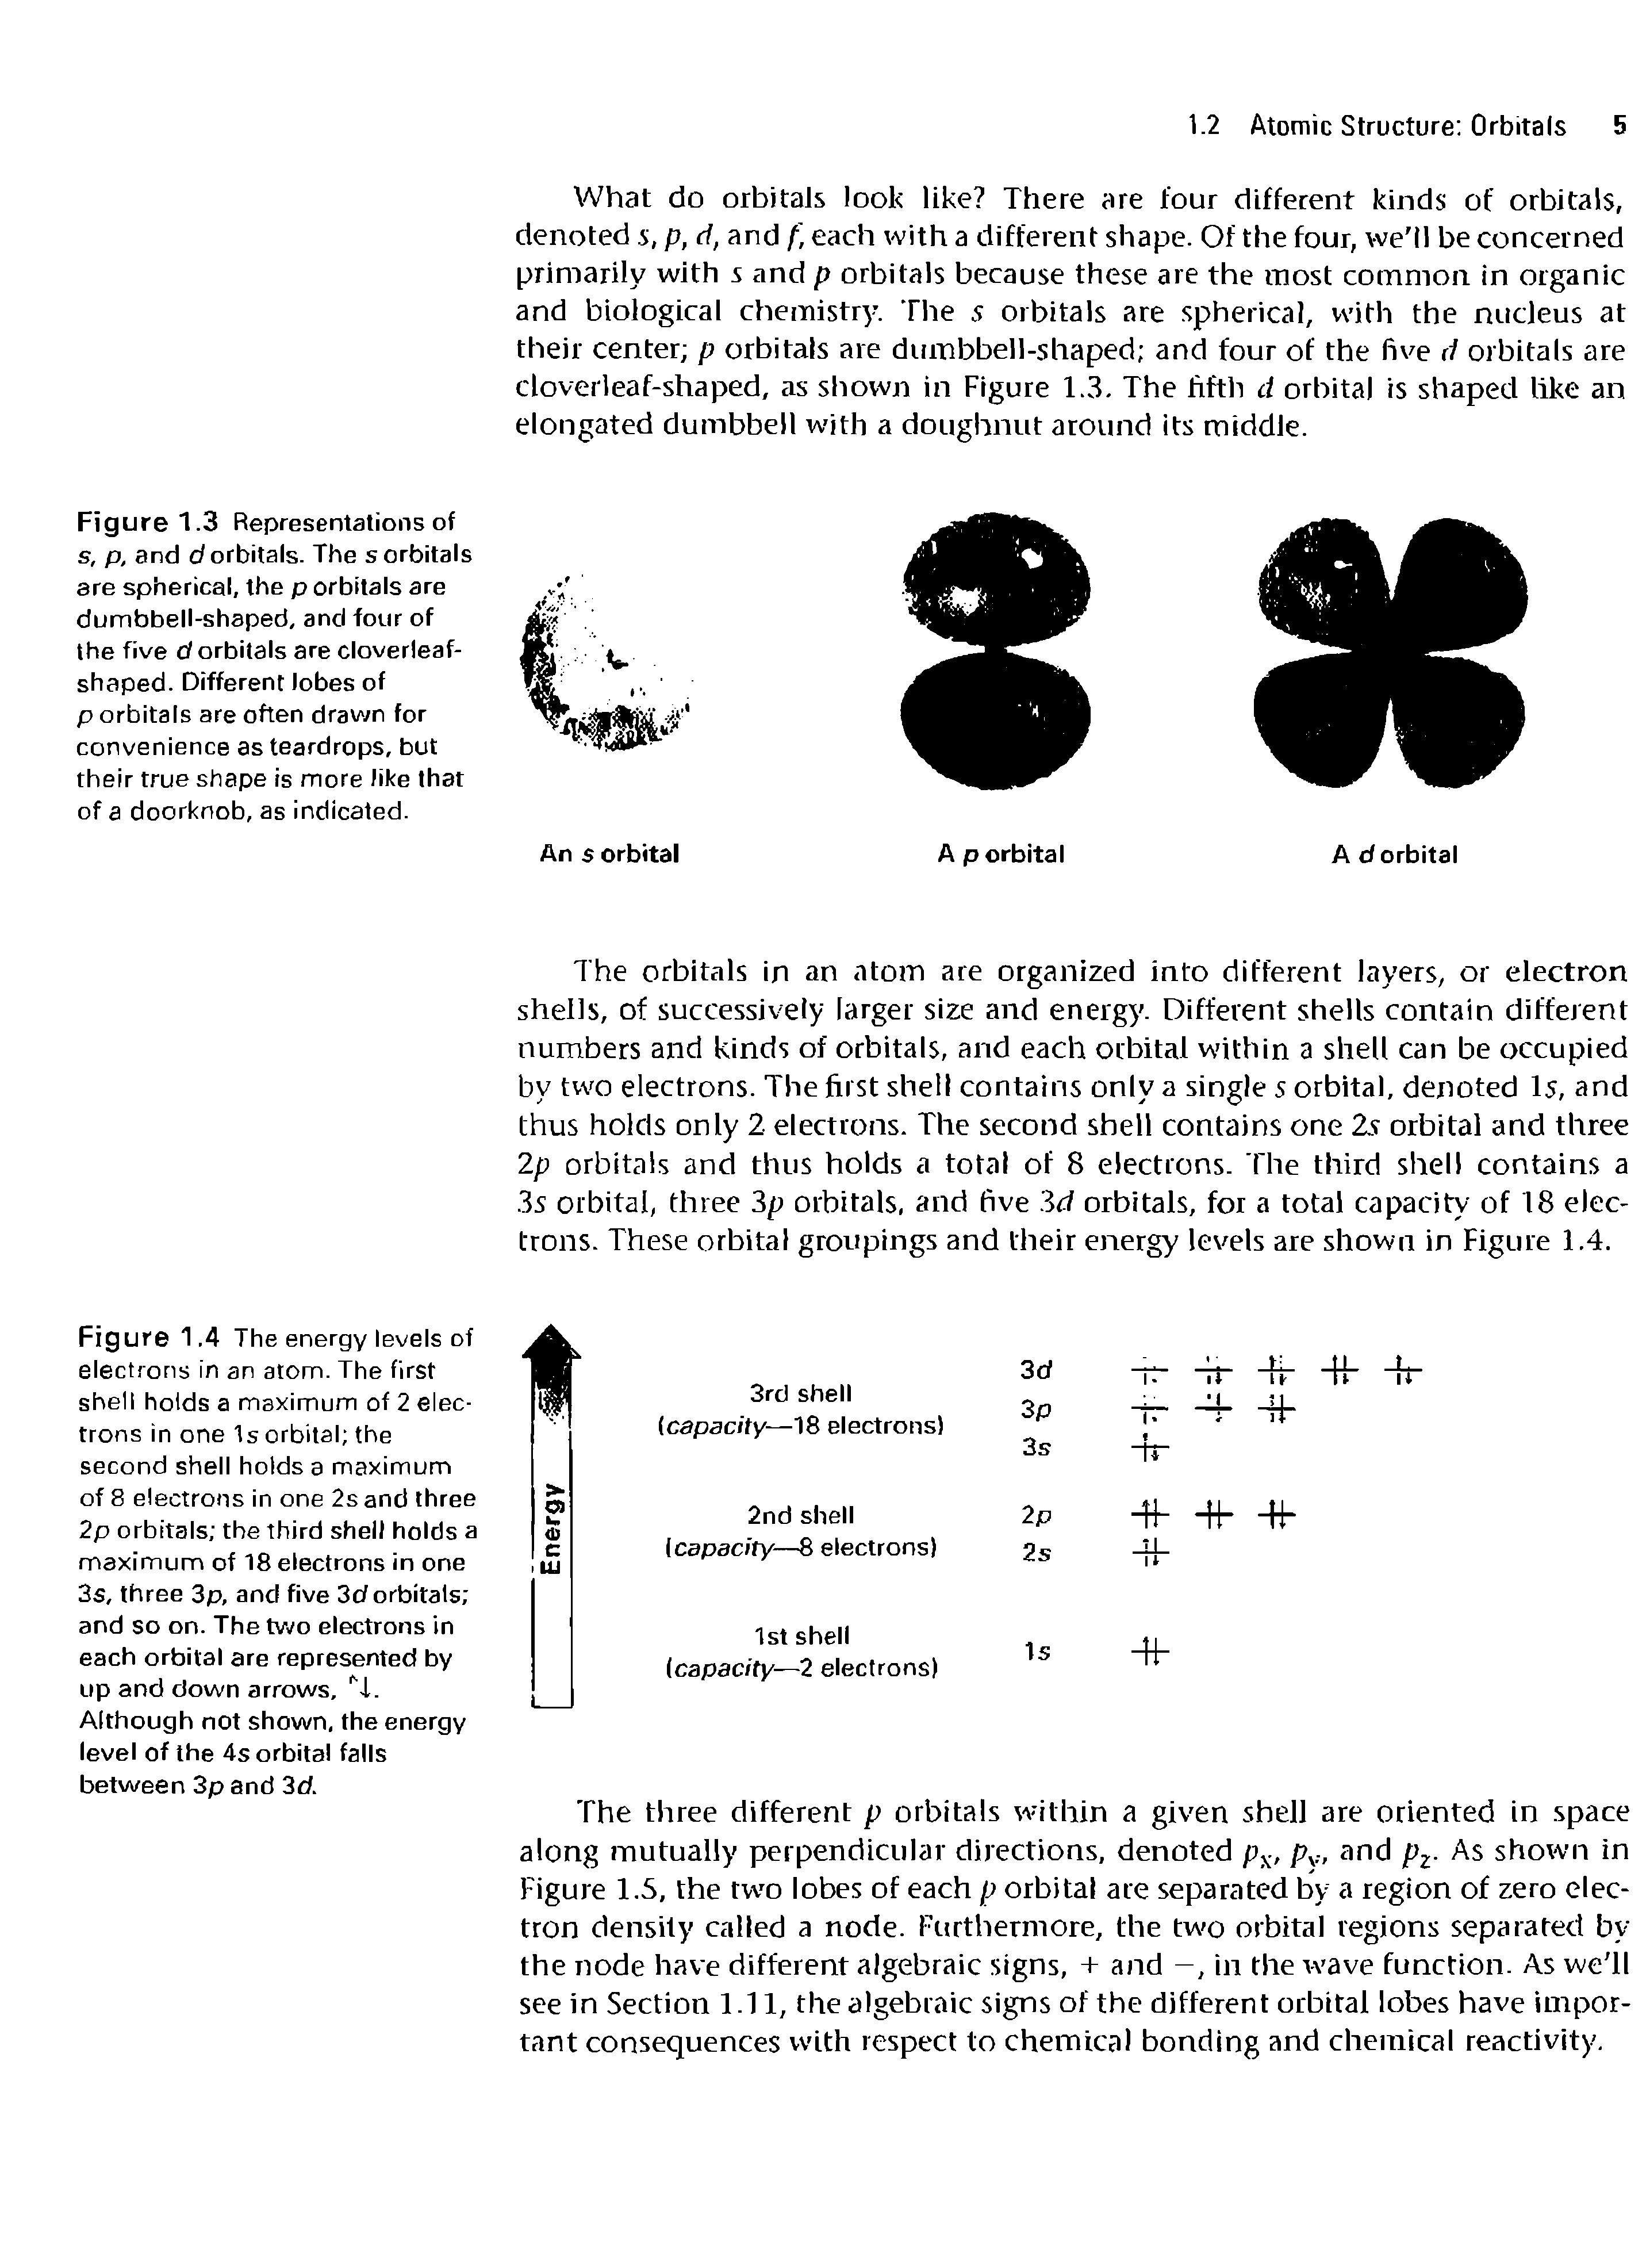 Figure 1.3 Representations of s, p, and d orbitals. The s orbitals are spherical, the p orbitals are dumbbell-shaped, and four of the five d orbitals are cloverleafshaped. Different lobes of p orbitals are often drawn for convenience as teardrops, but their true shape is more like that of a doorknob, as indicated.